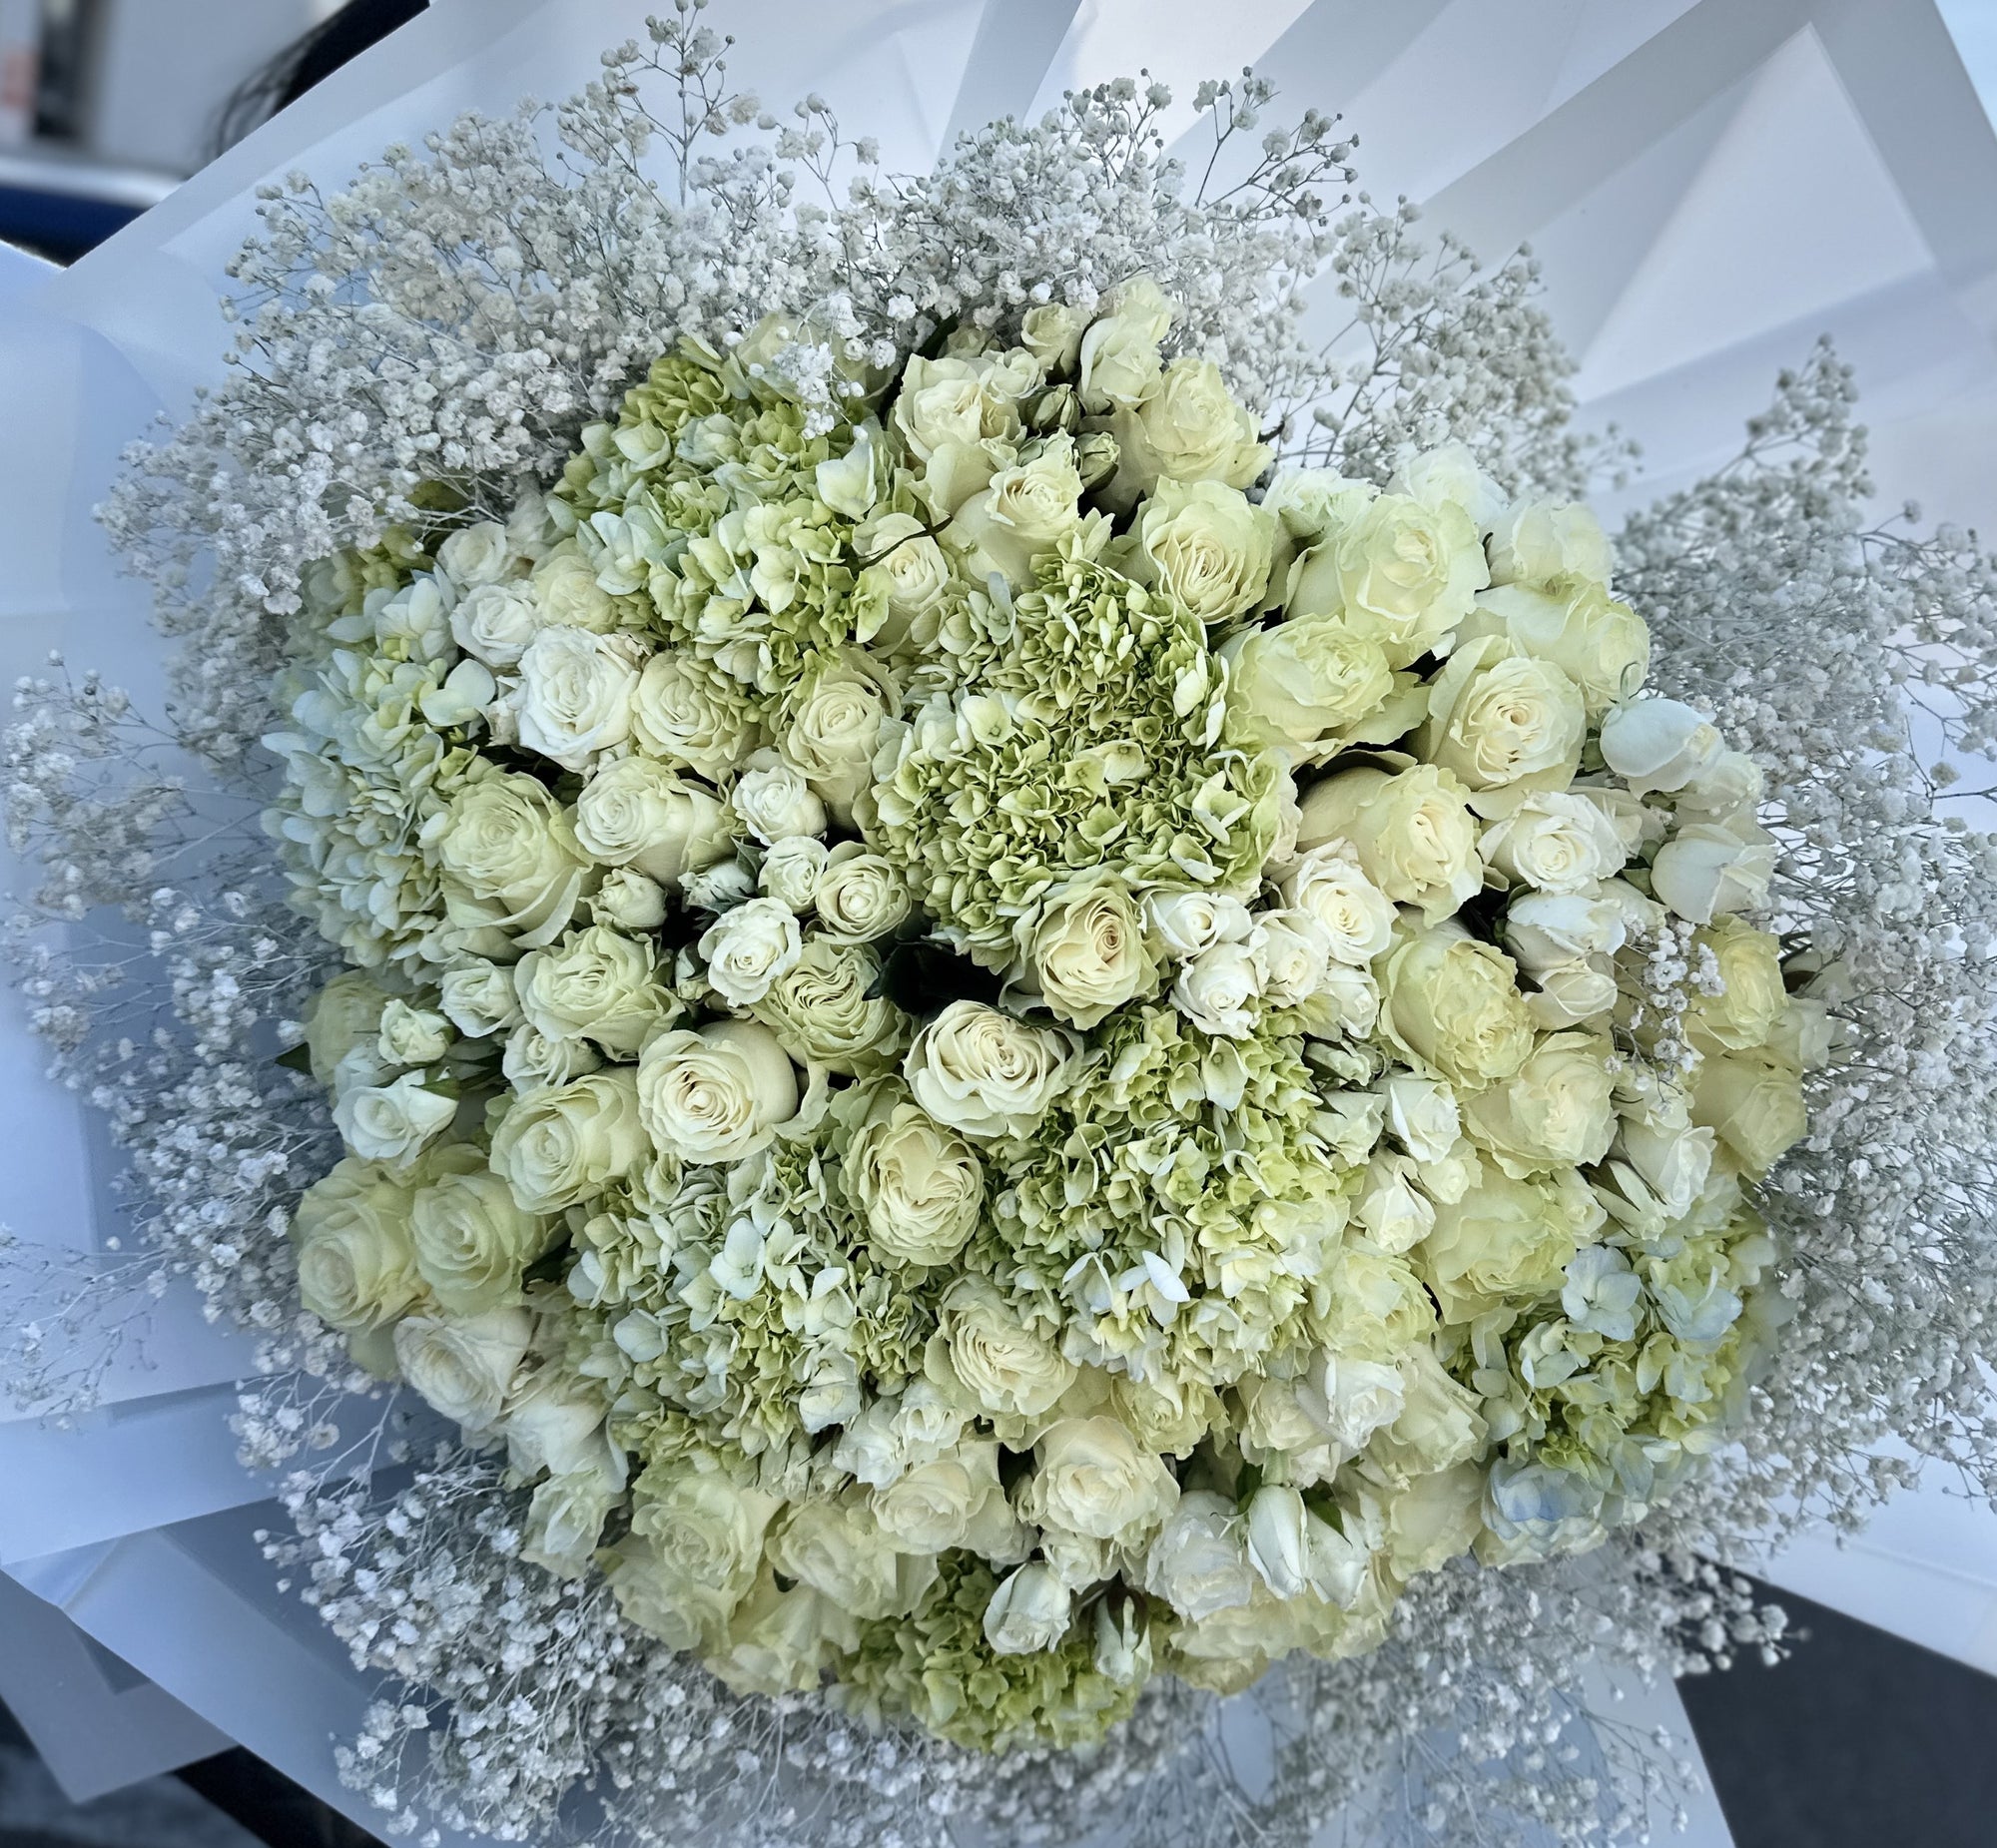 Mondial Roses and Baby's Breath Bouquet features delicate and romantic Mondial Roses paired with whimsical Baby's Breath for a stunning and unique arrangement